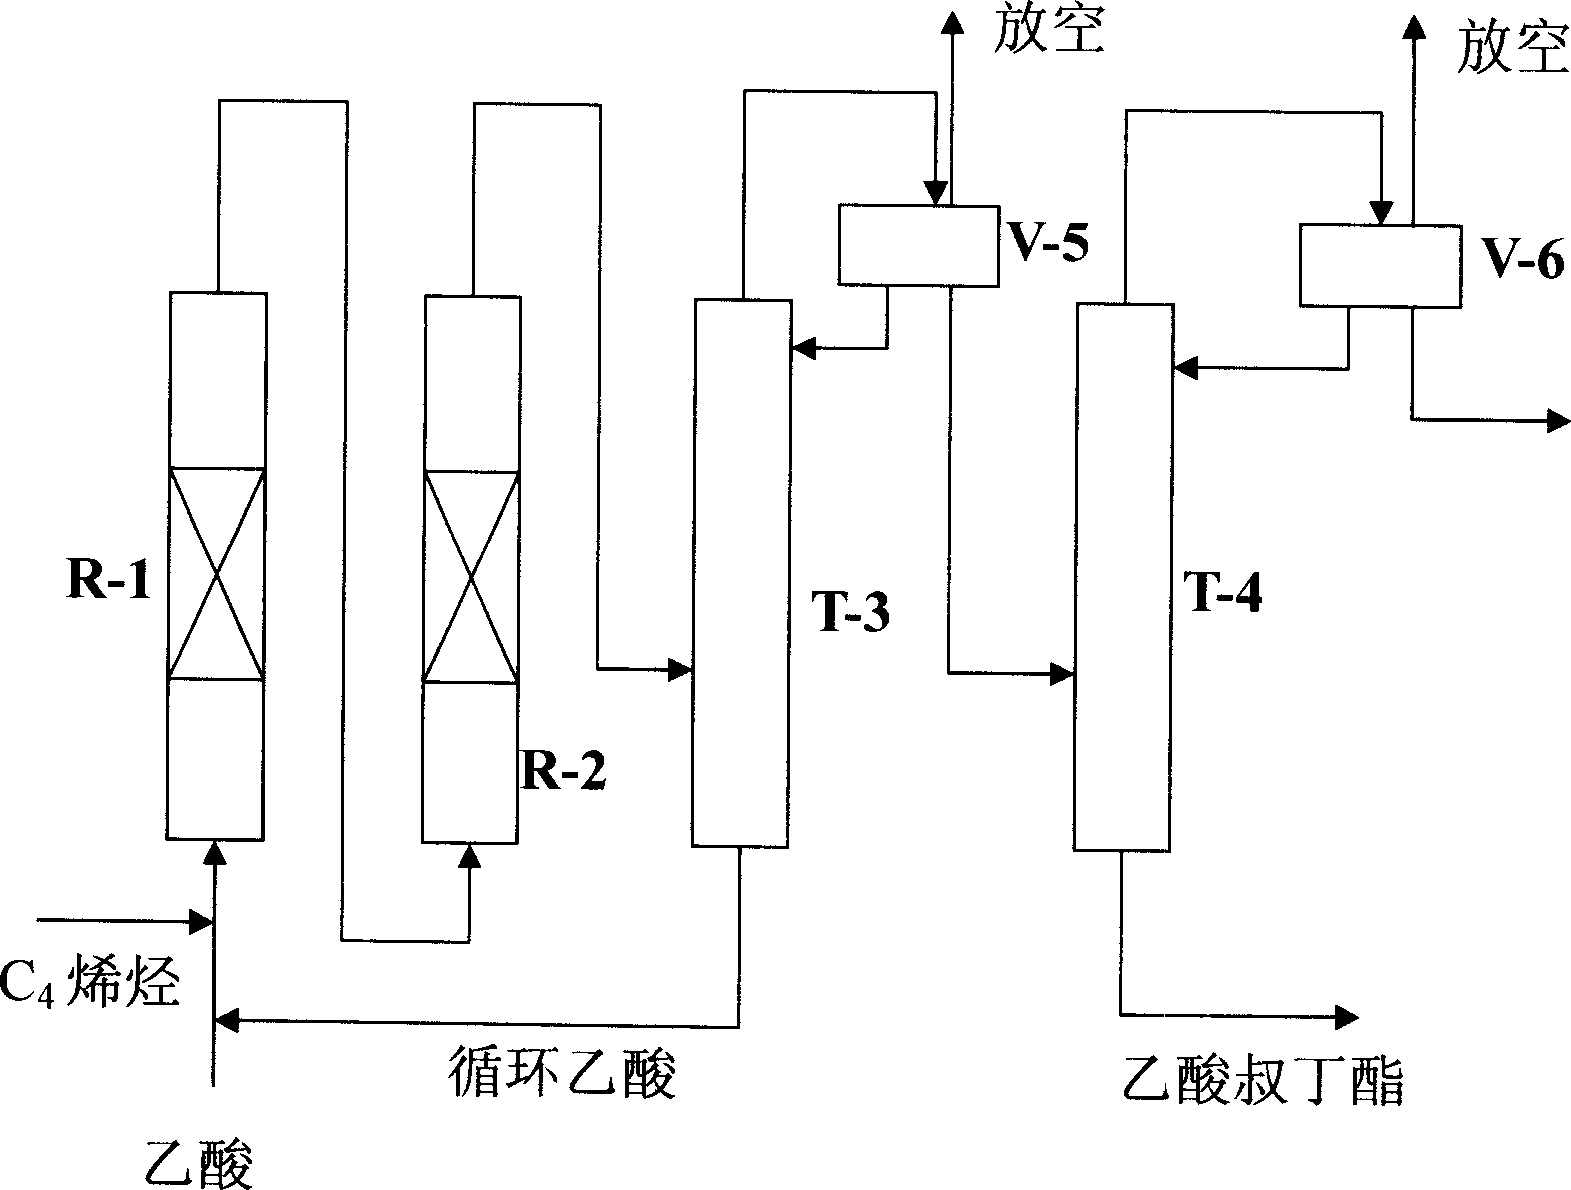 Process for preparing and extracting tert-butyl acetate